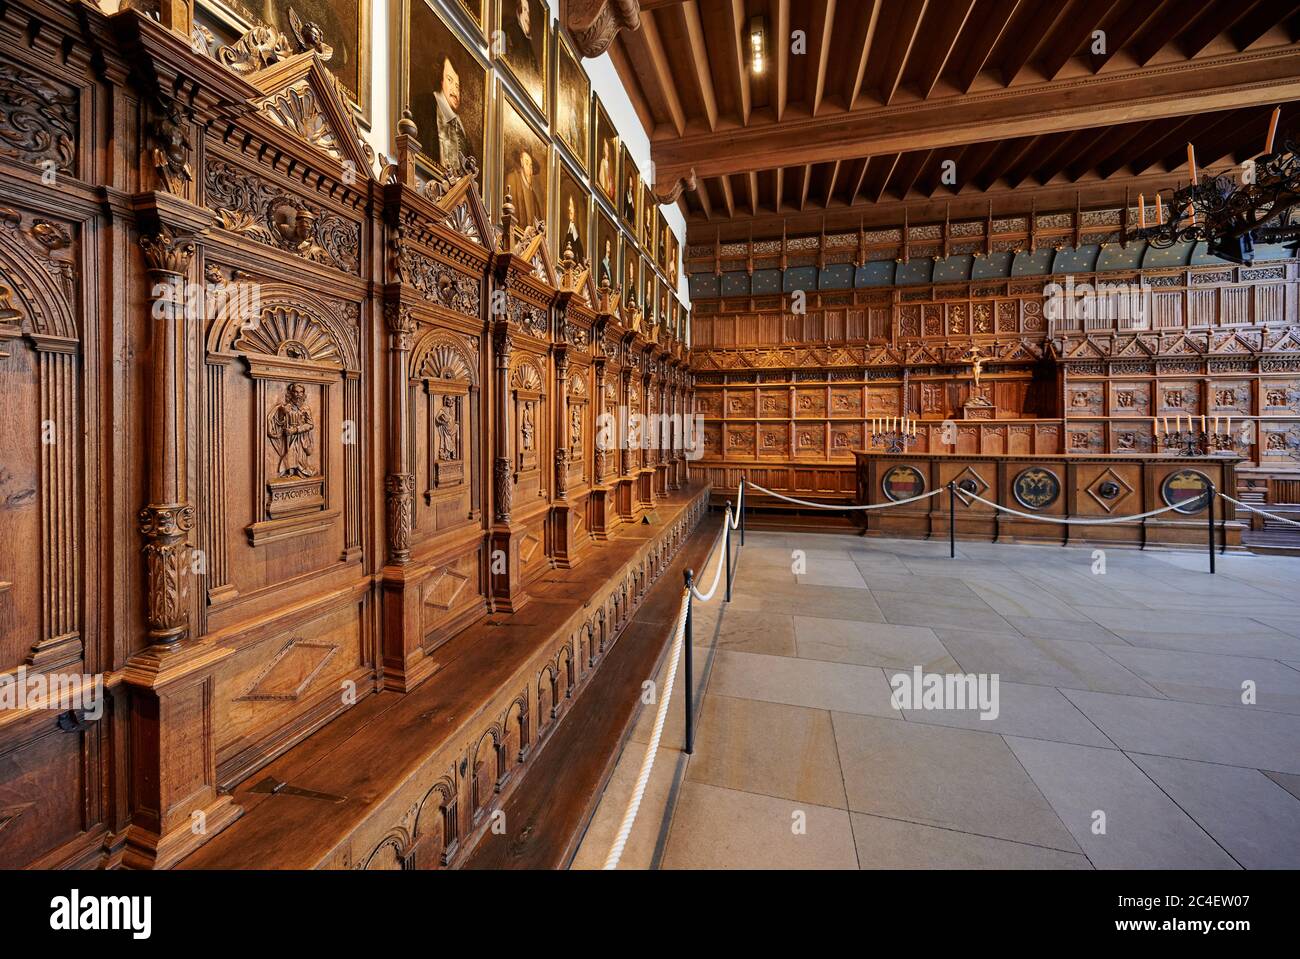 Hall of Peace in the townhall, Treaty of Westphalia, Interior shot in the historic town hall of Muenster, North Rhine-Westphalia, Germany Stock Photo